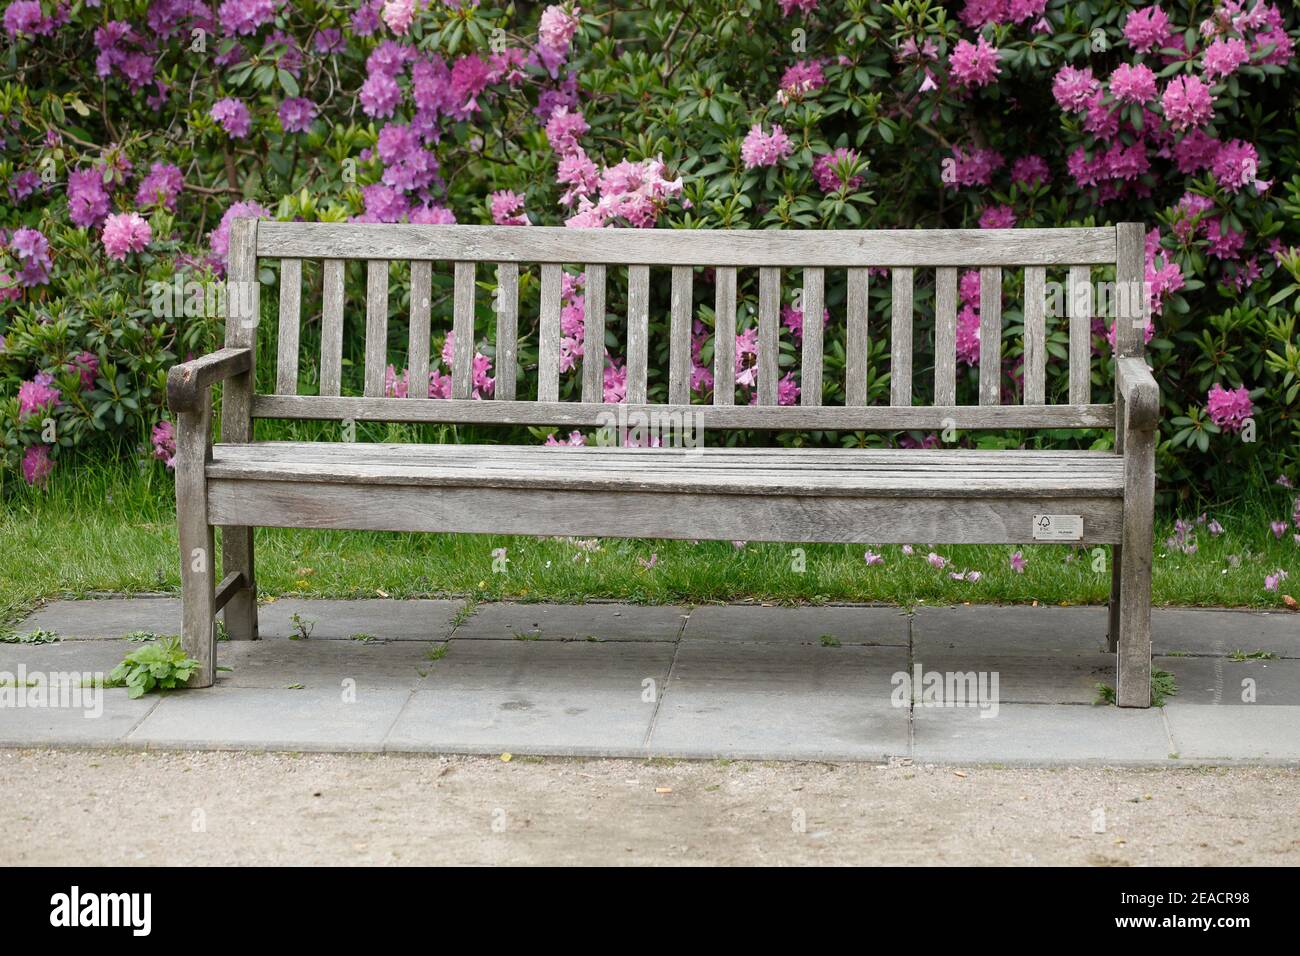 Old wooden bench in a park in front of a pink rhododendron bush, Germany Stock Photo